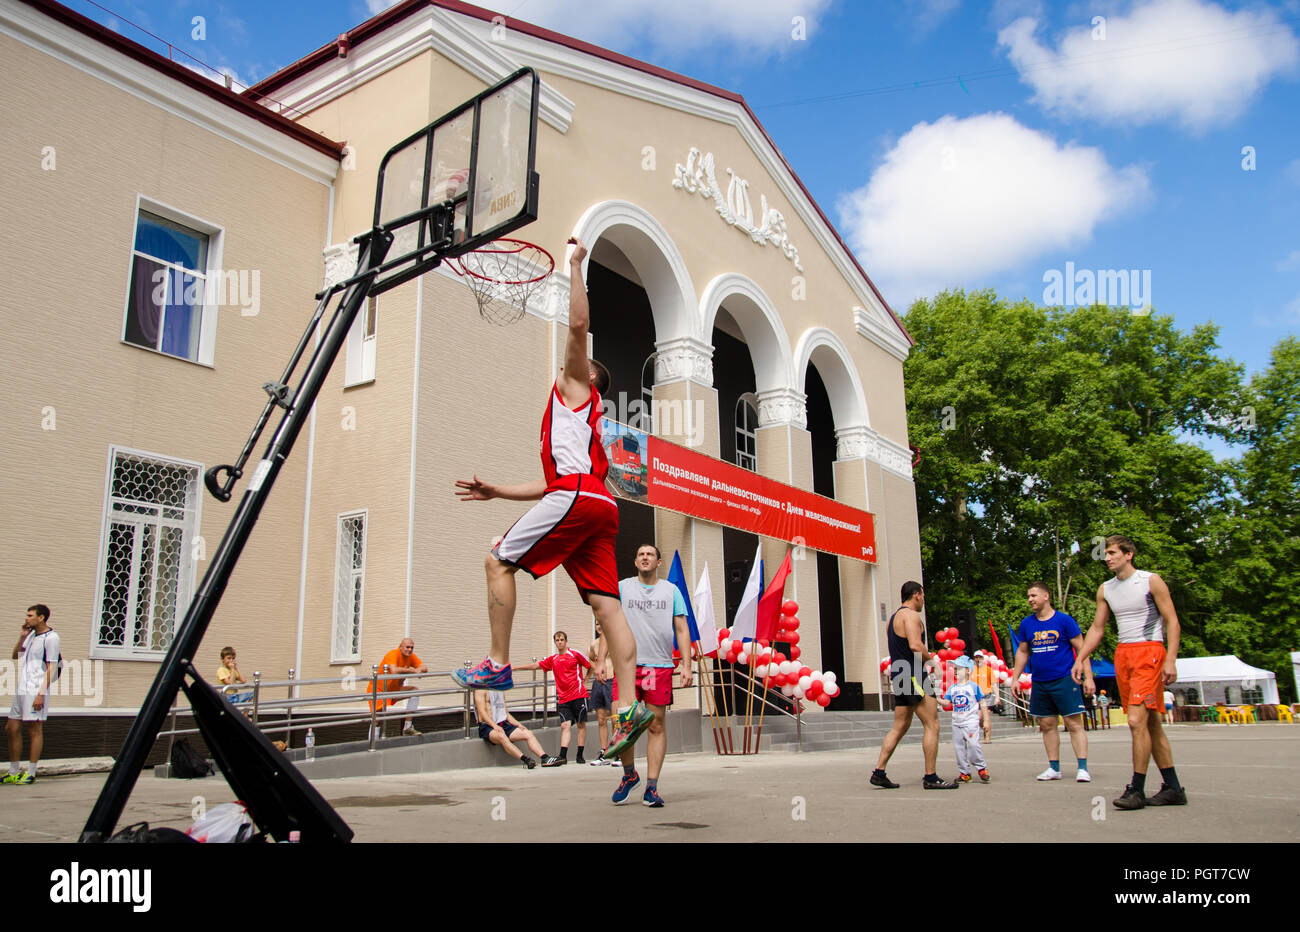 Komsomolsk-on-Amur, Russia, 1 August 2015. Railroader's day. Young men play amateur basketball in summer. Low point shooting Stock Photo